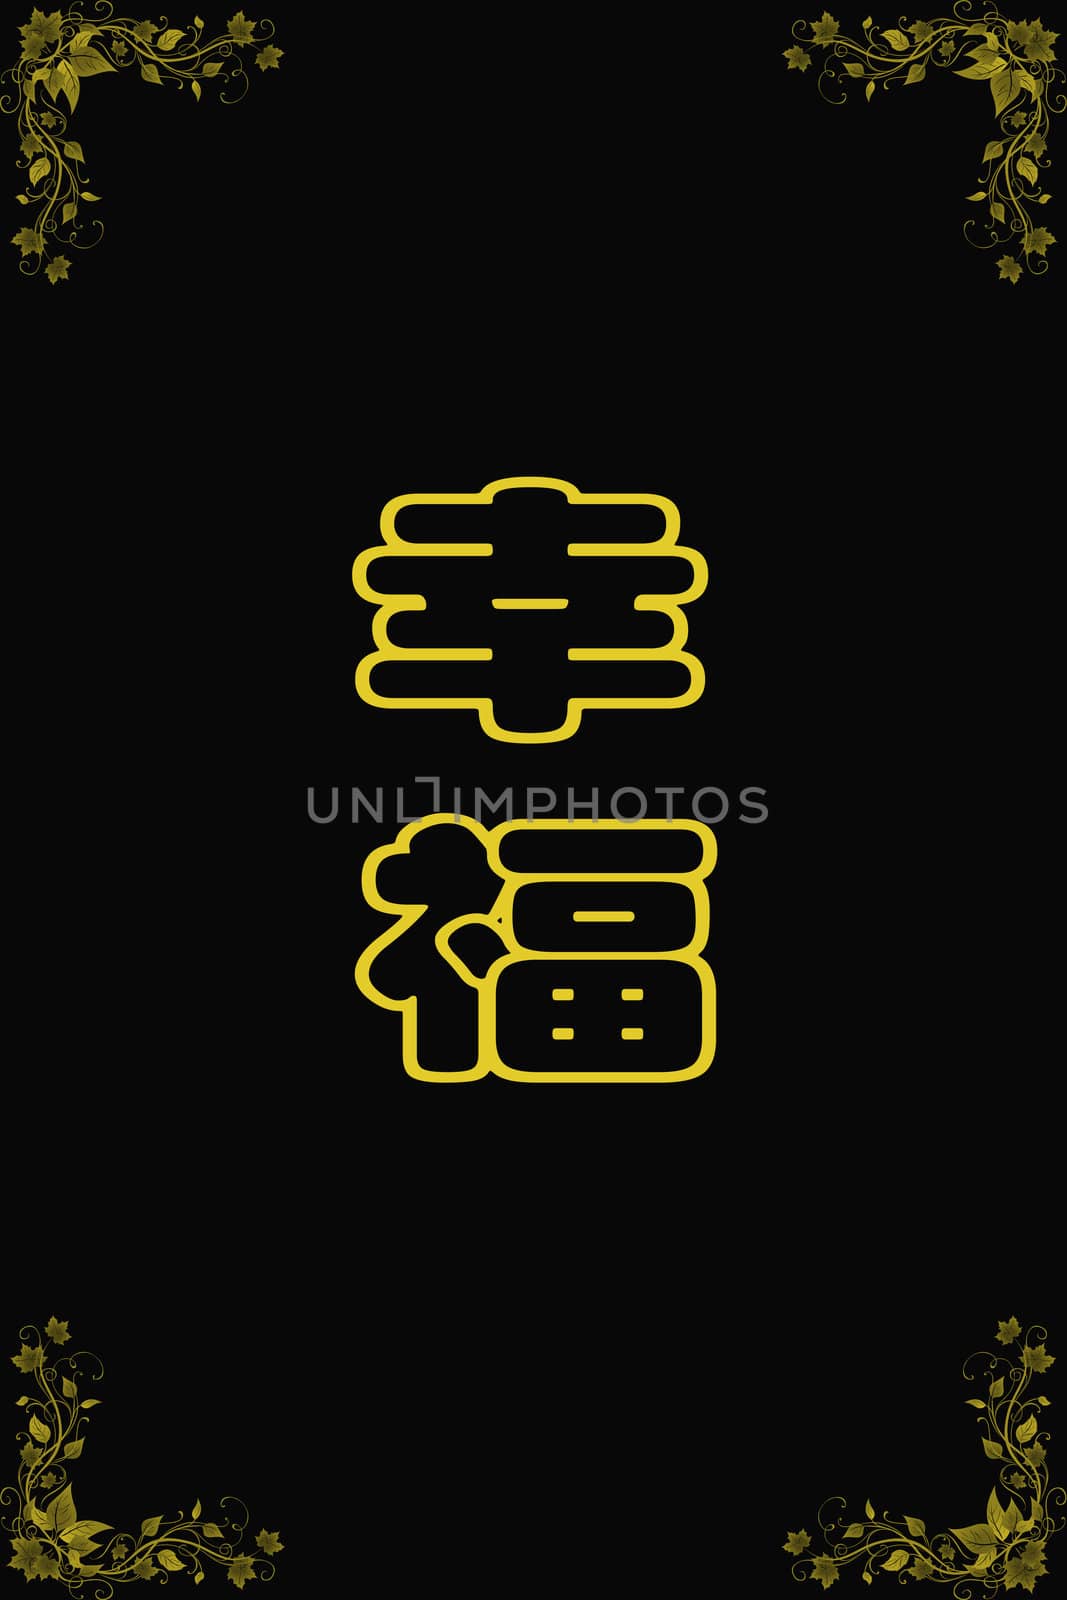 Chinese characters of HAPPY on black background